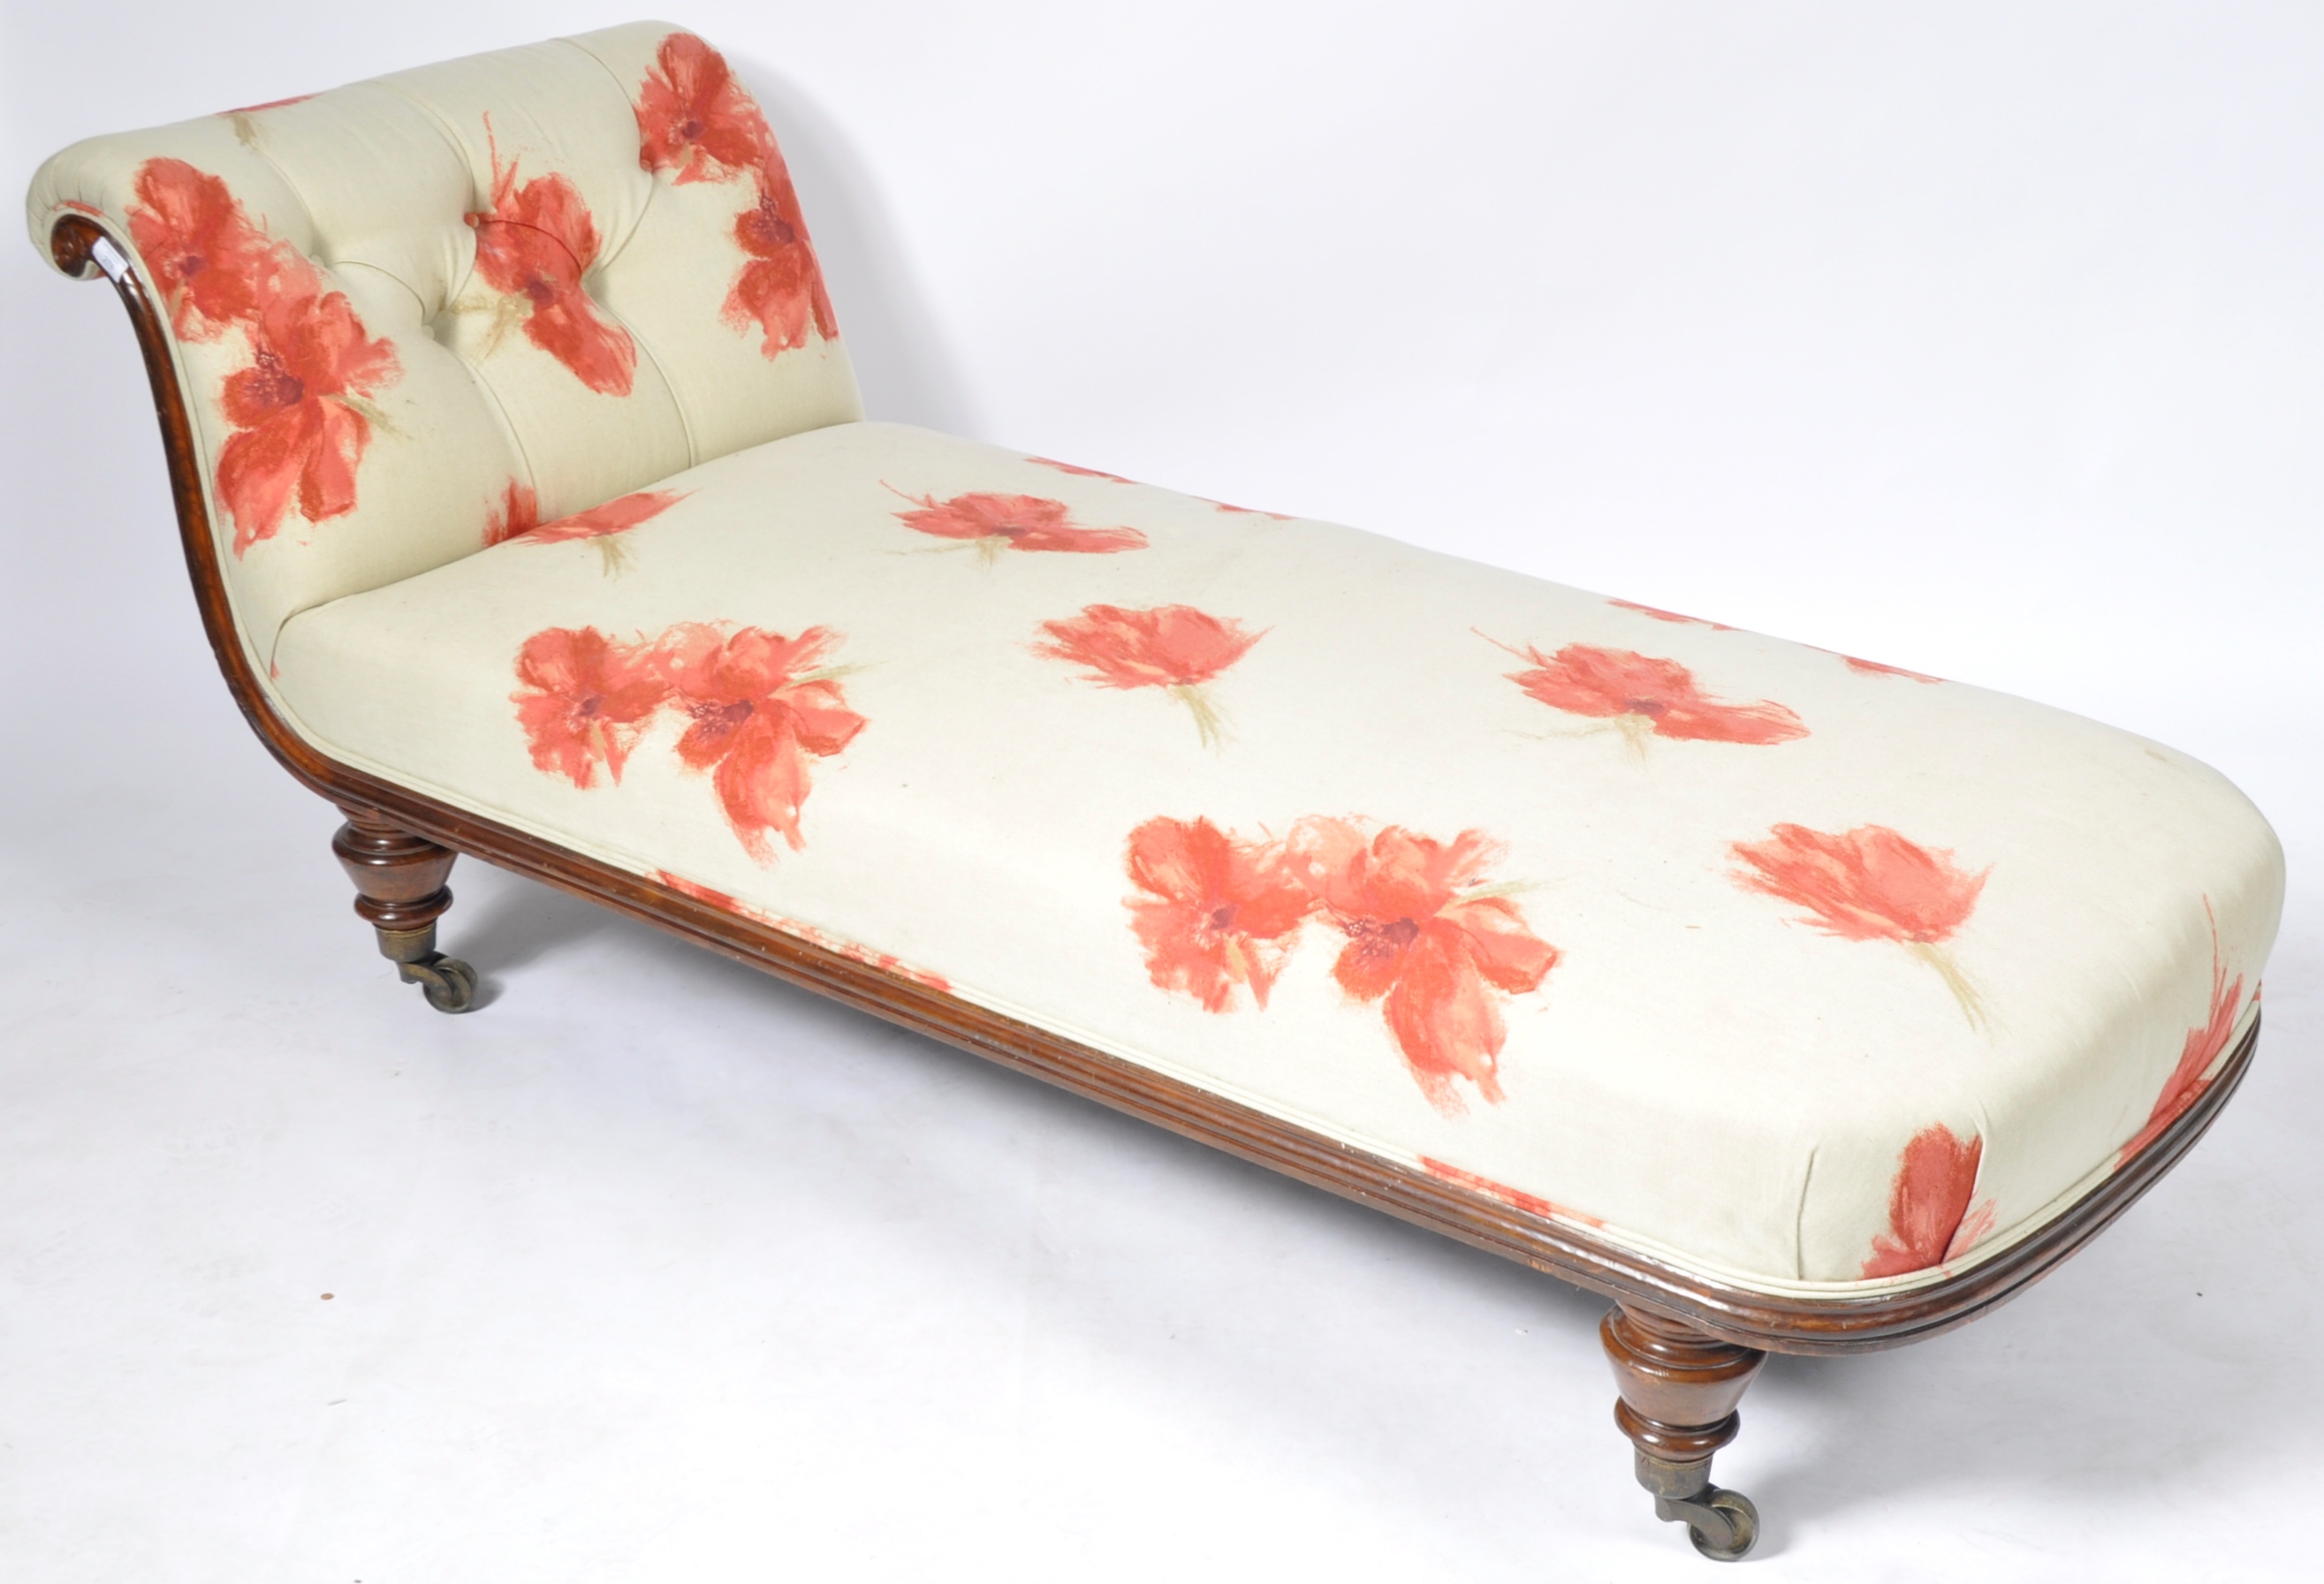 19TH CENTURY VICTORIAN MAHOGANY CHAISE LOUNGE DAYBED - Image 2 of 8